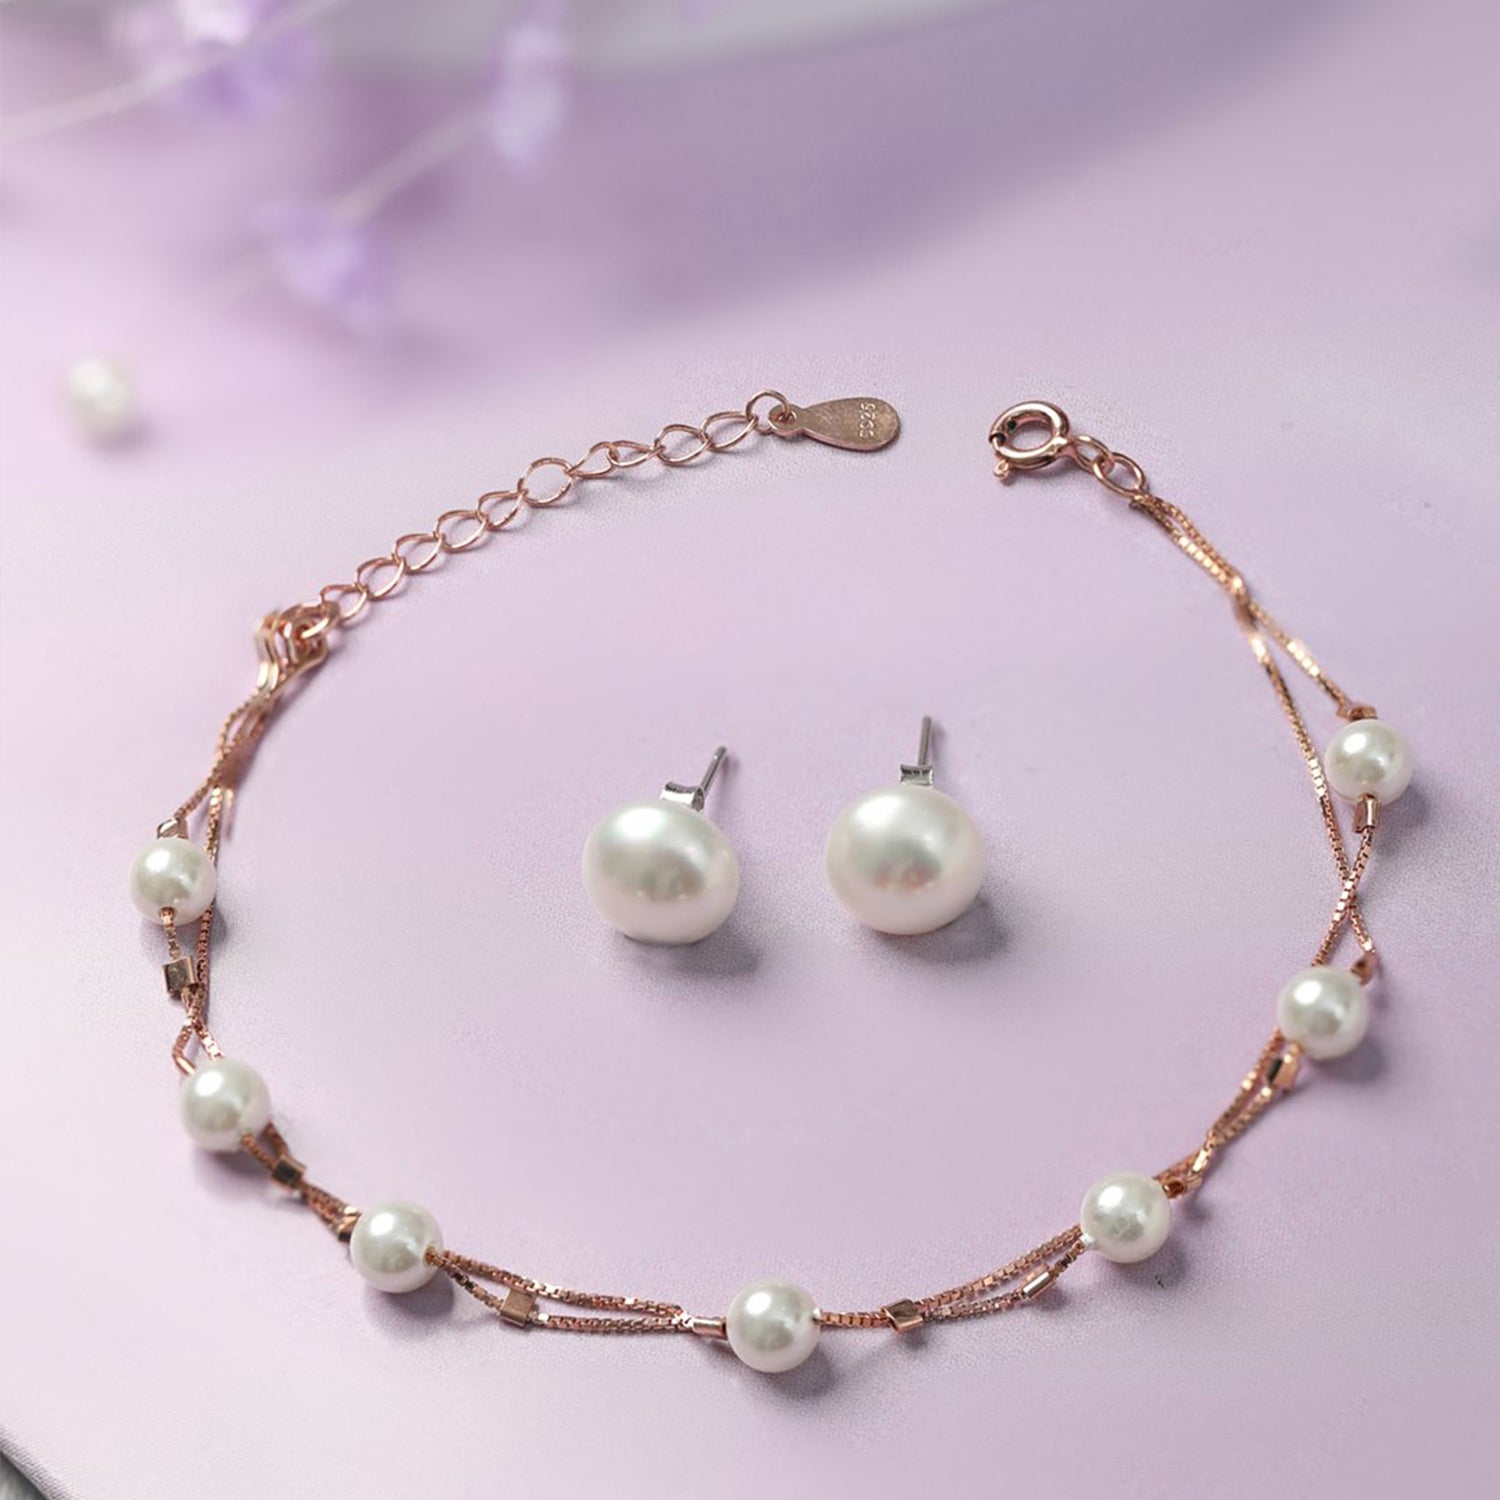 Victoria Freshwater Pearl 925 Silver Bracelet and Earrings Set in Rose Gold